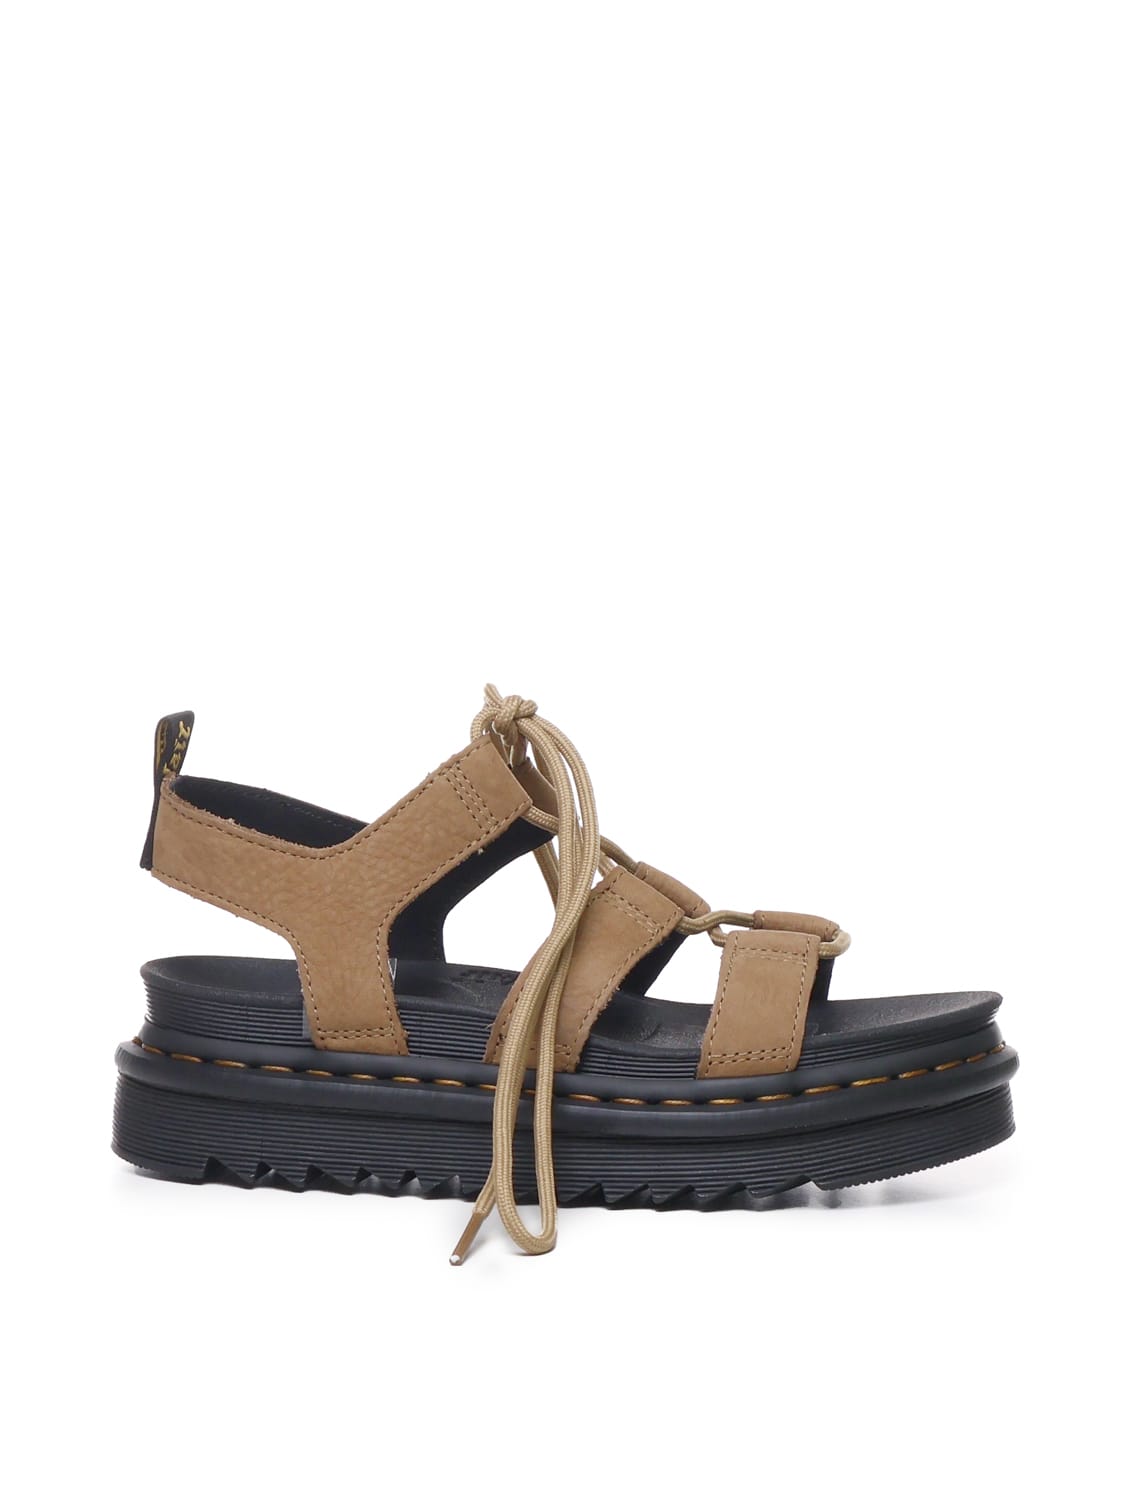 Nartilla Sandals In Tumbled Leather